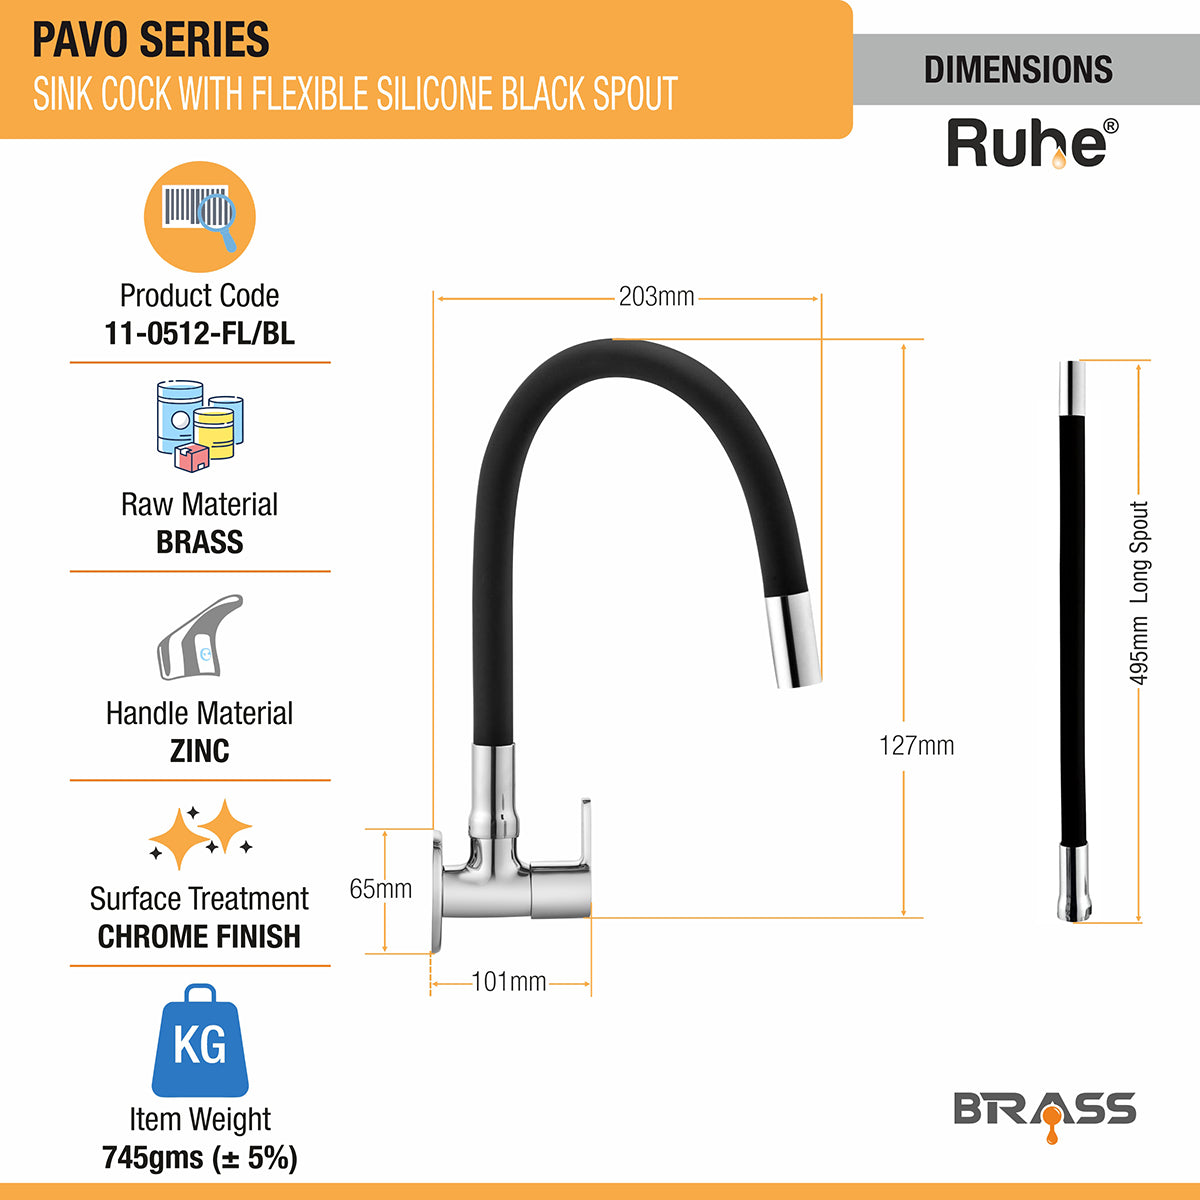 Pavo Brass Sink Tap with Flexible Silicone Black Spout dimensions and sizes